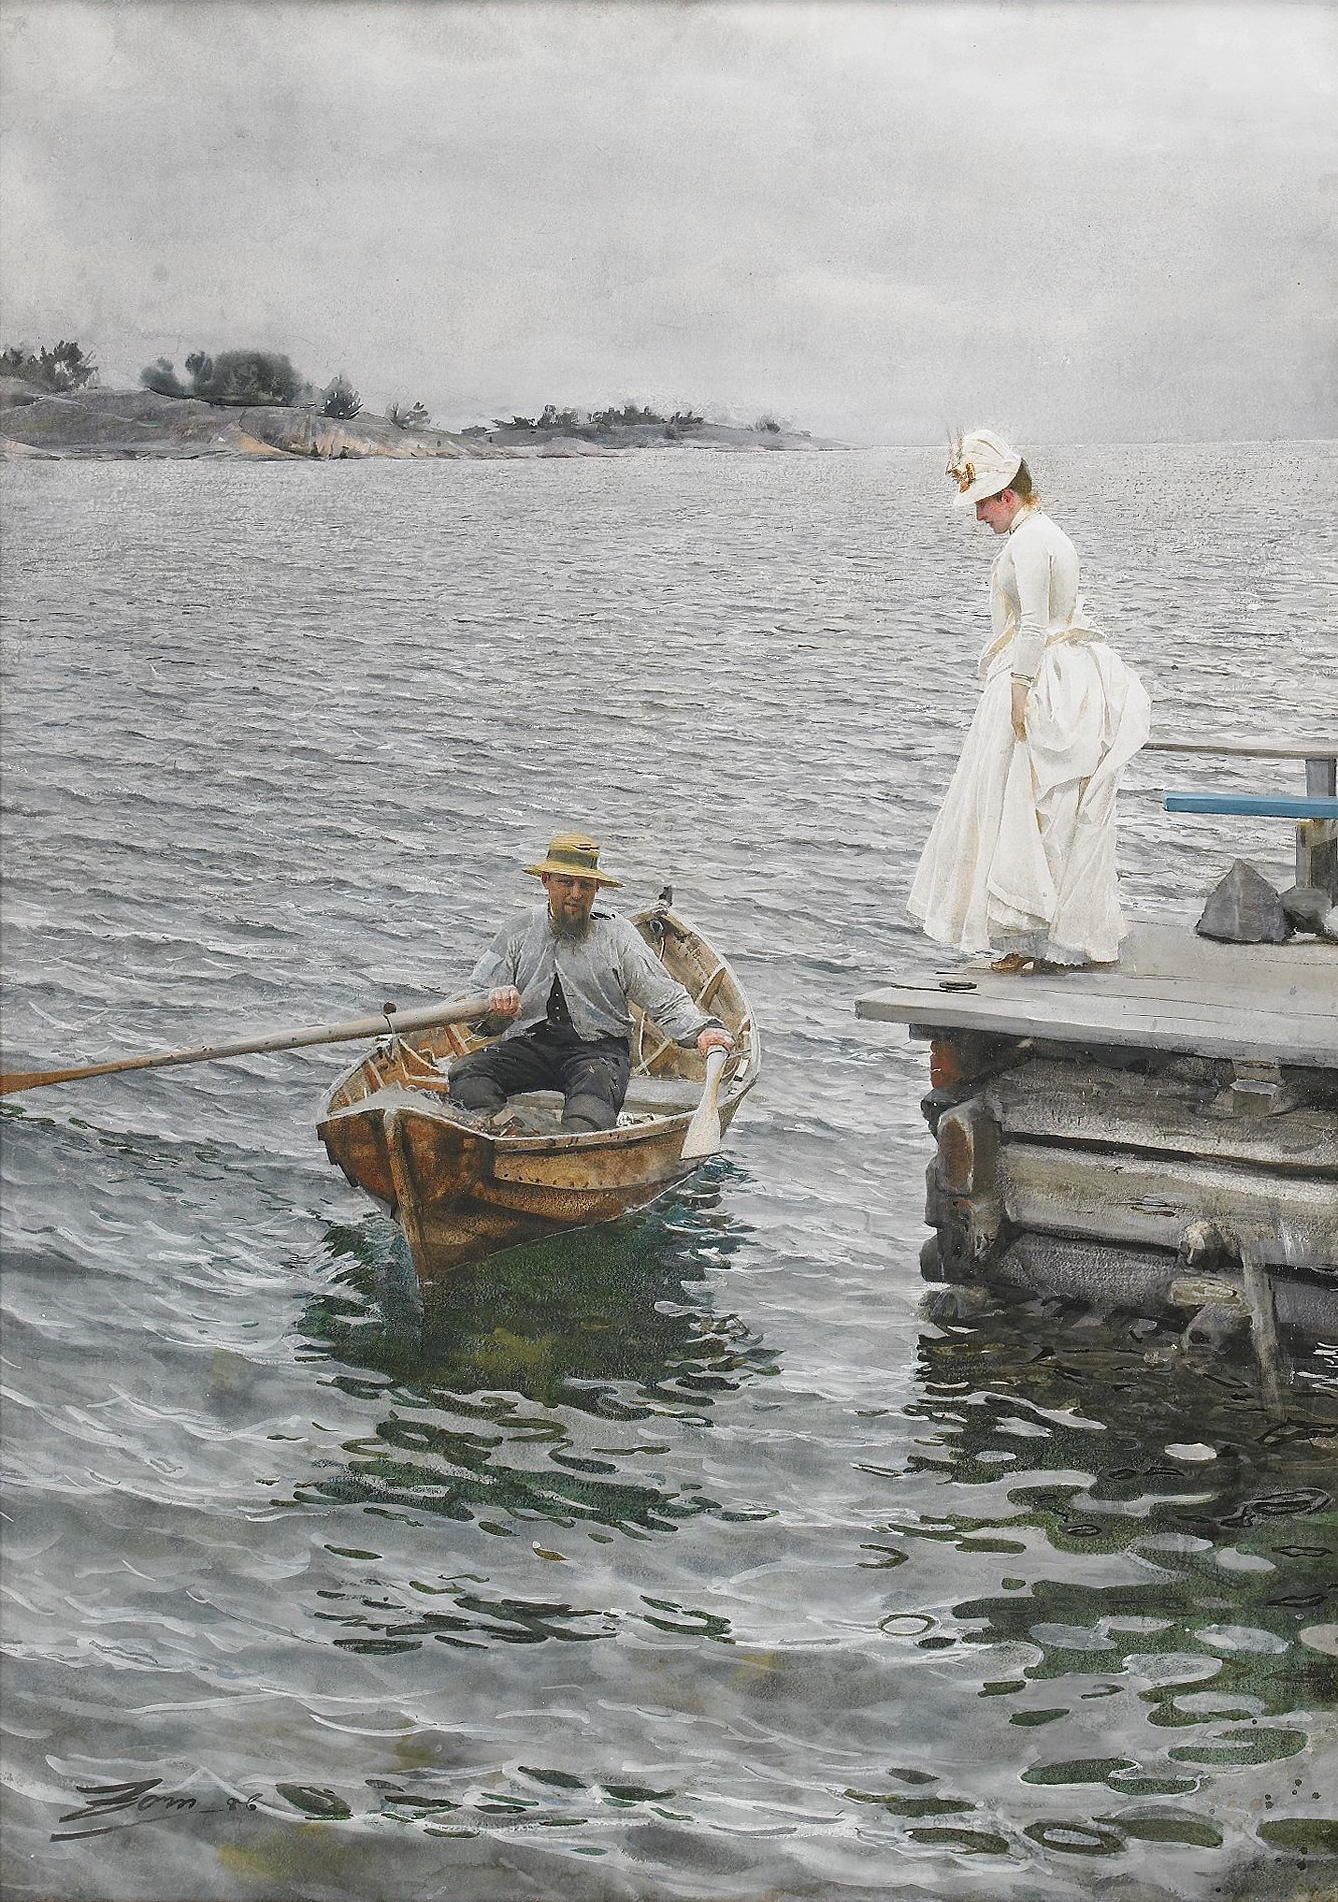 Summer Delight by Anders Zorn - 1886 - 76 x 54 cm private collection